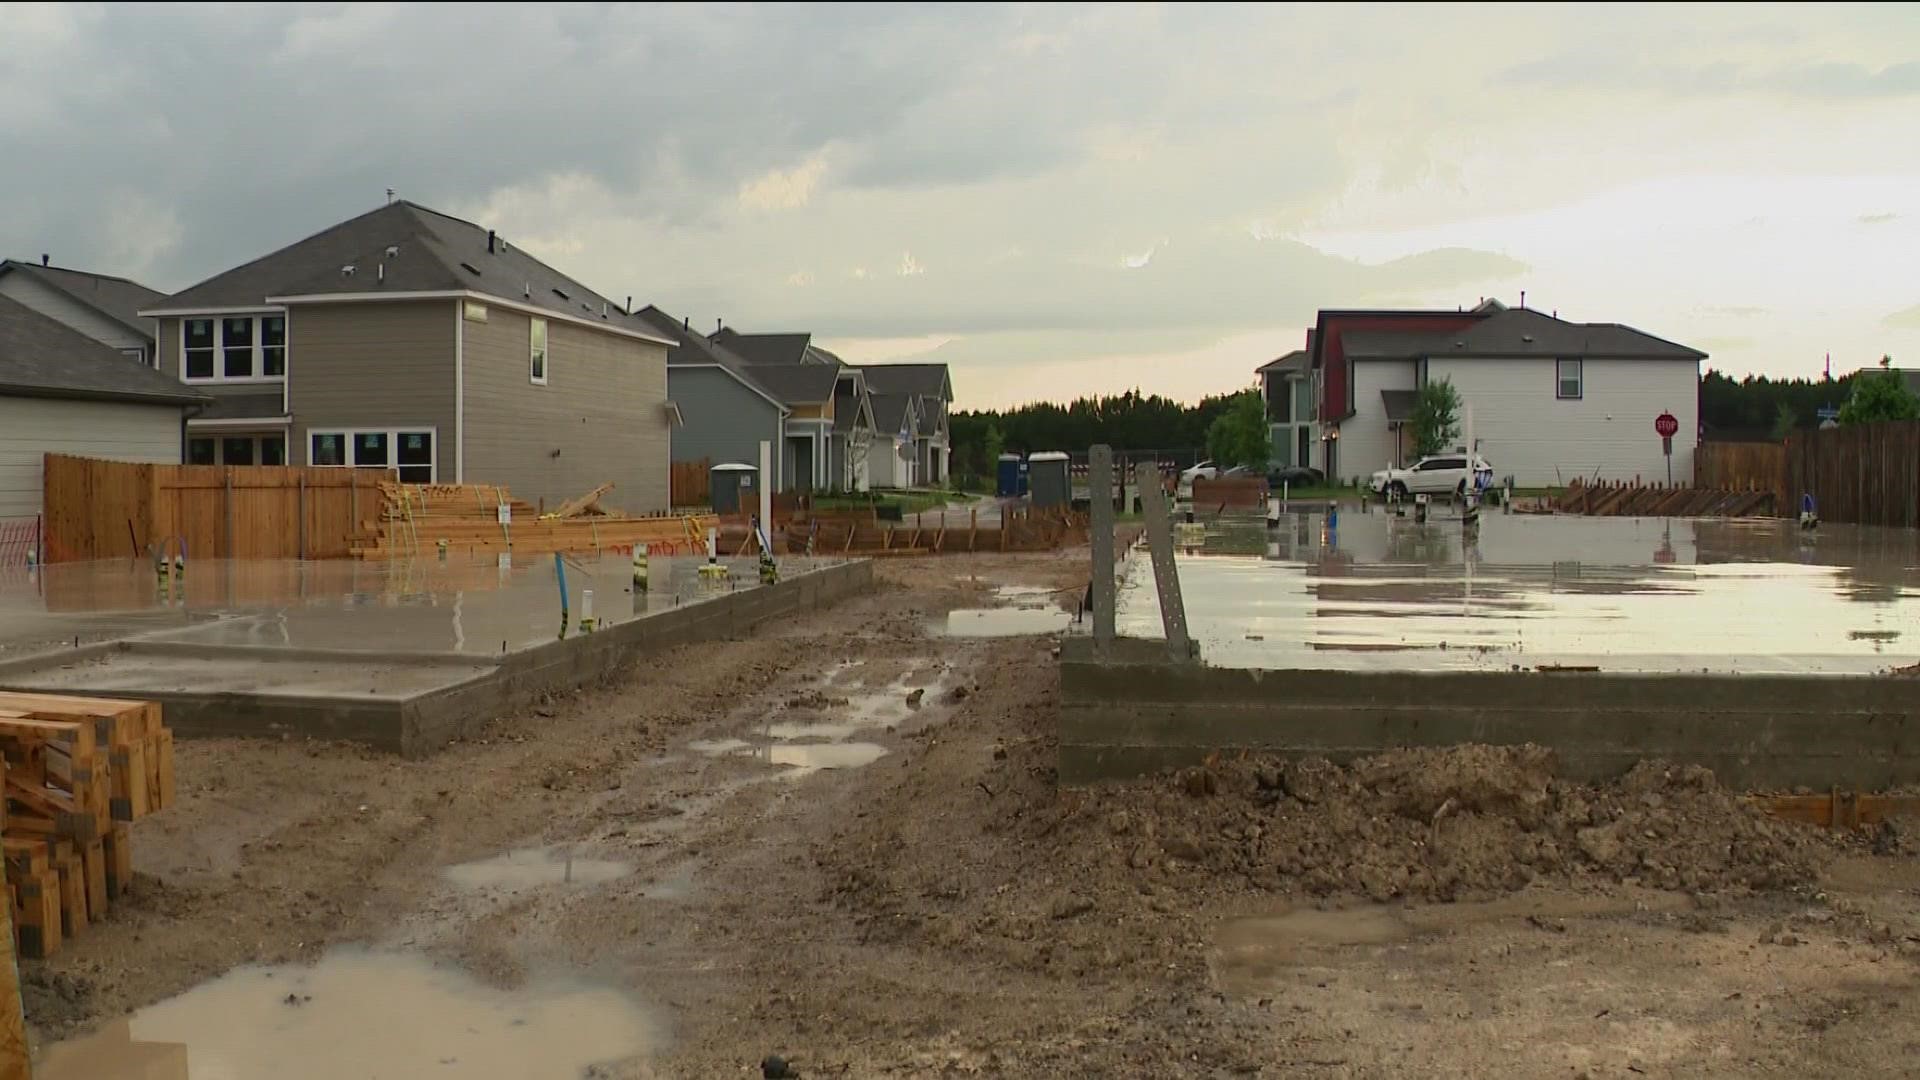 Austin's Habitat for Humanity received a $4 million load to help build 150 single-family homes.